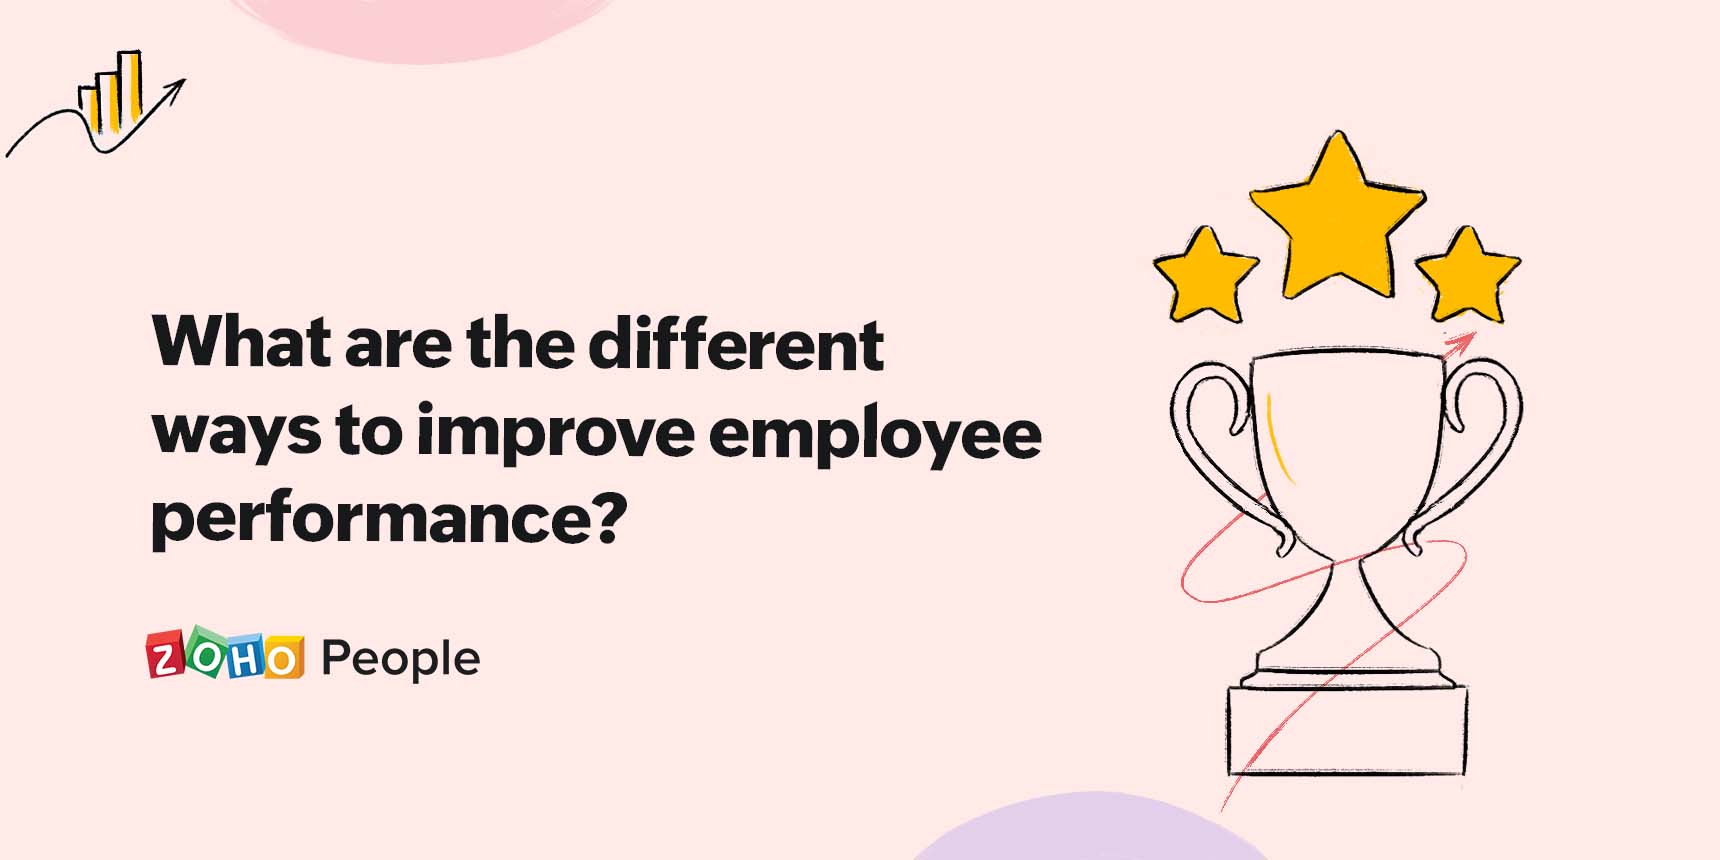 What are the different ways to improve employee performance?